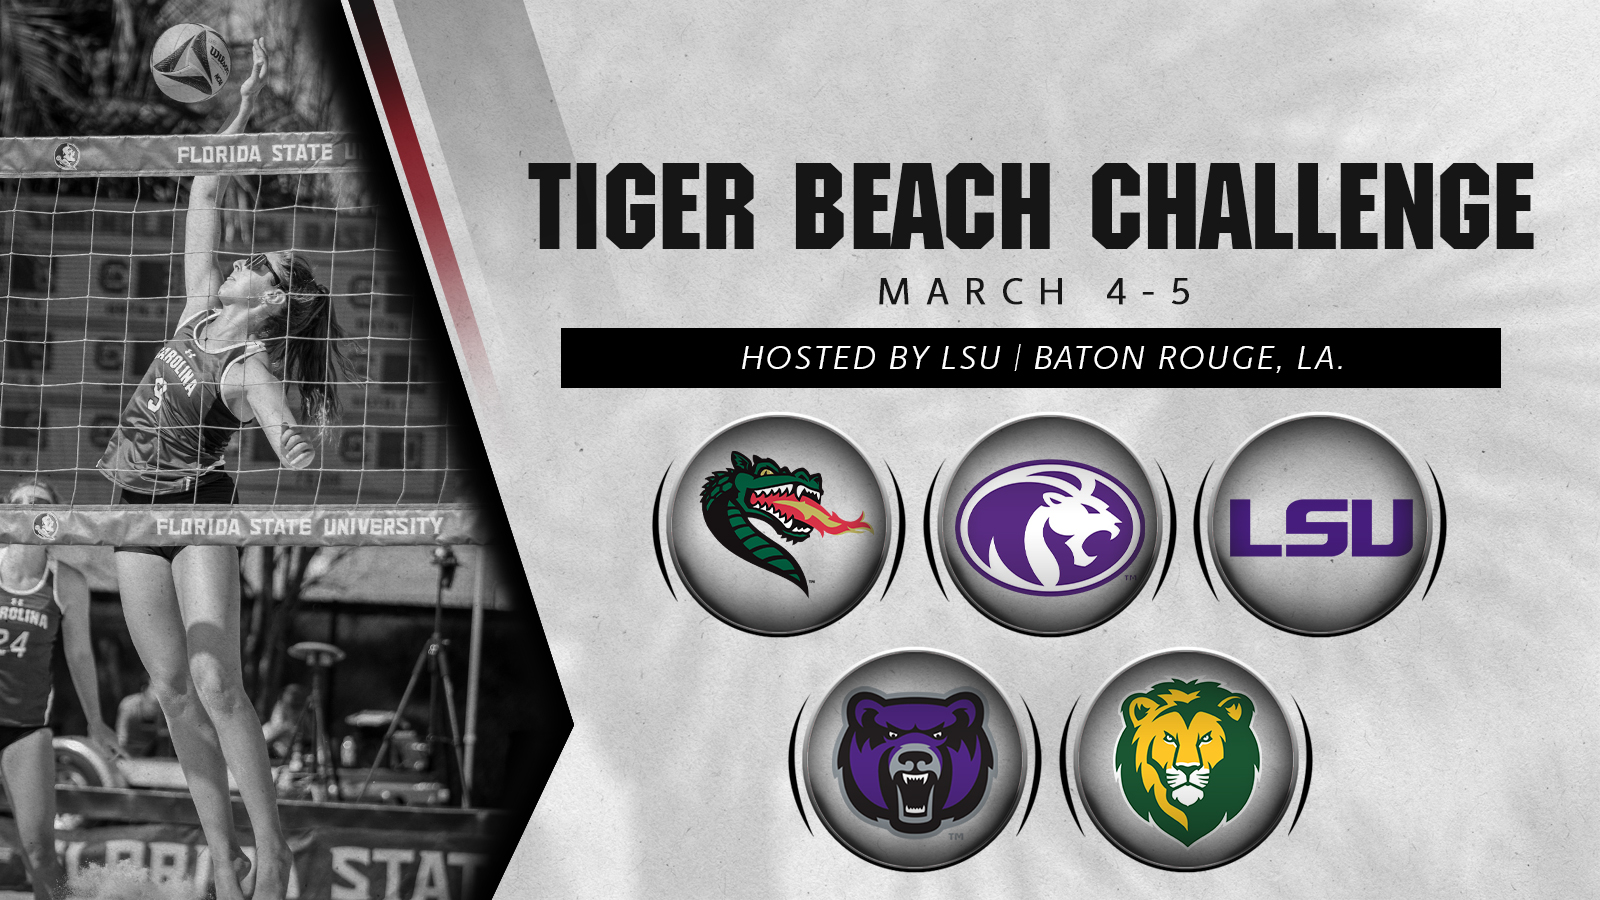 Gamecocks to Compete in Tiger Beach Challenge